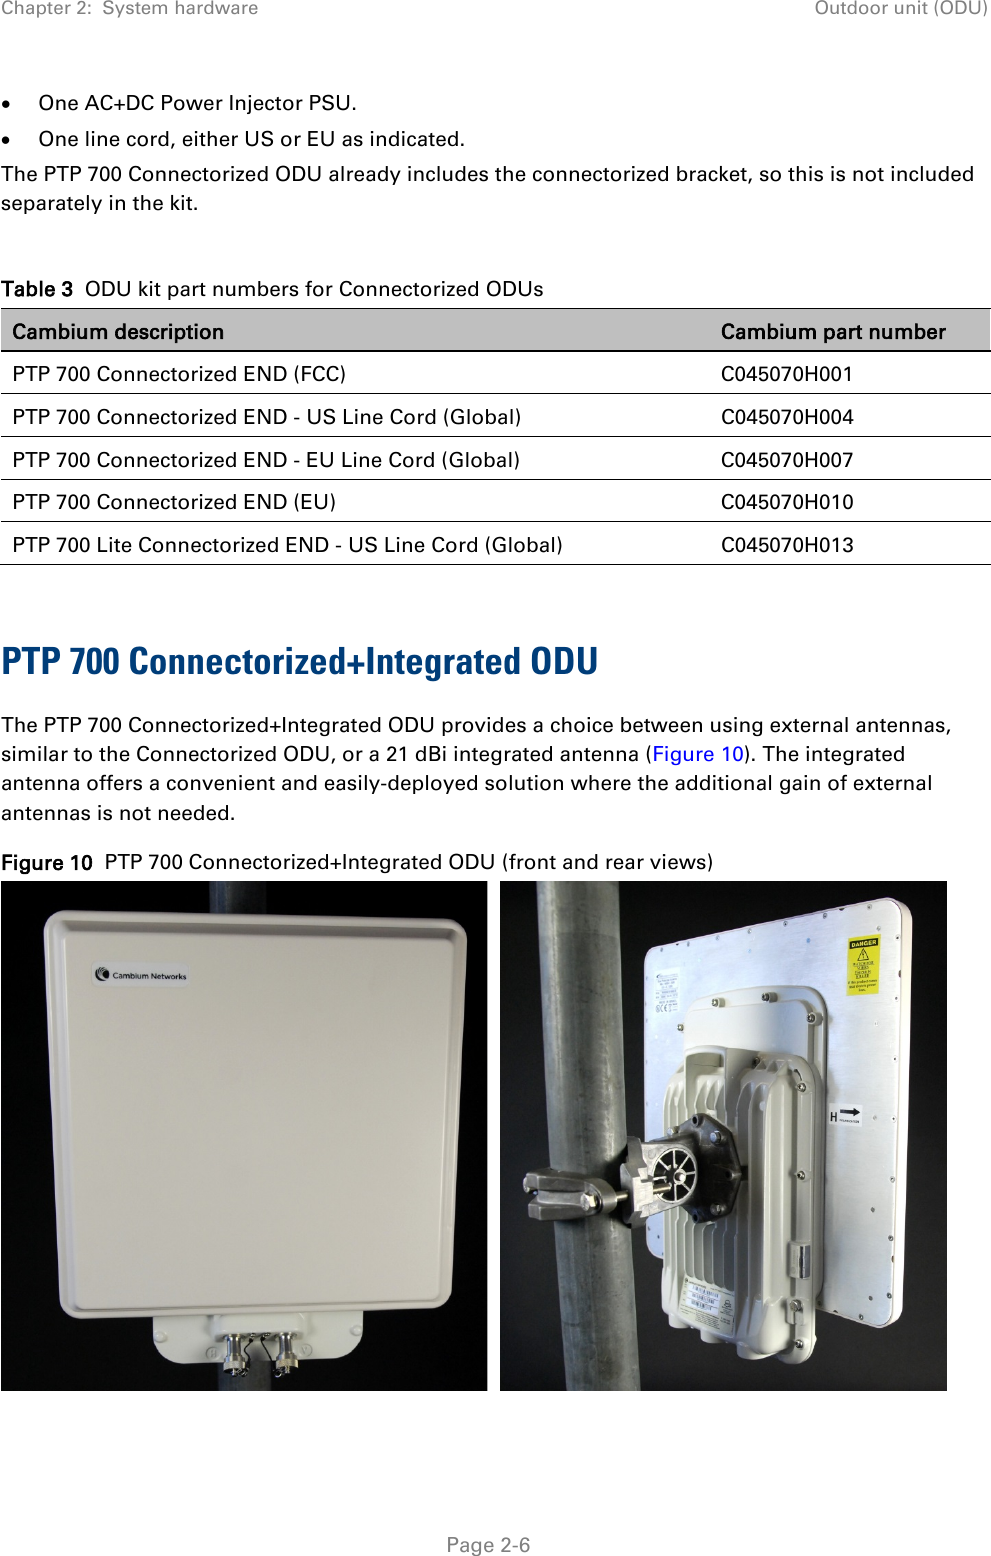 Chapter 2:  System hardware Outdoor unit (ODU)  • One AC+DC Power Injector PSU. • One line cord, either US or EU as indicated. The PTP 700 Connectorized ODU already includes the connectorized bracket, so this is not included separately in the kit.  Table 3  ODU kit part numbers for Connectorized ODUs Cambium description Cambium part number PTP 700 Connectorized END (FCC) C045070H001 PTP 700 Connectorized END - US Line Cord (Global) C045070H004 PTP 700 Connectorized END - EU Line Cord (Global) C045070H007 PTP 700 Connectorized END (EU) C045070H010 PTP 700 Lite Connectorized END - US Line Cord (Global) C045070H013  PTP 700 Connectorized+Integrated ODU The PTP 700 Connectorized+Integrated ODU provides a choice between using external antennas, similar to the Connectorized ODU, or a 21 dBi integrated antenna (Figure 10). The integrated antenna offers a convenient and easily-deployed solution where the additional gain of external antennas is not needed. Figure 10  PTP 700 Connectorized+Integrated ODU (front and rear views)       Page 2-6 